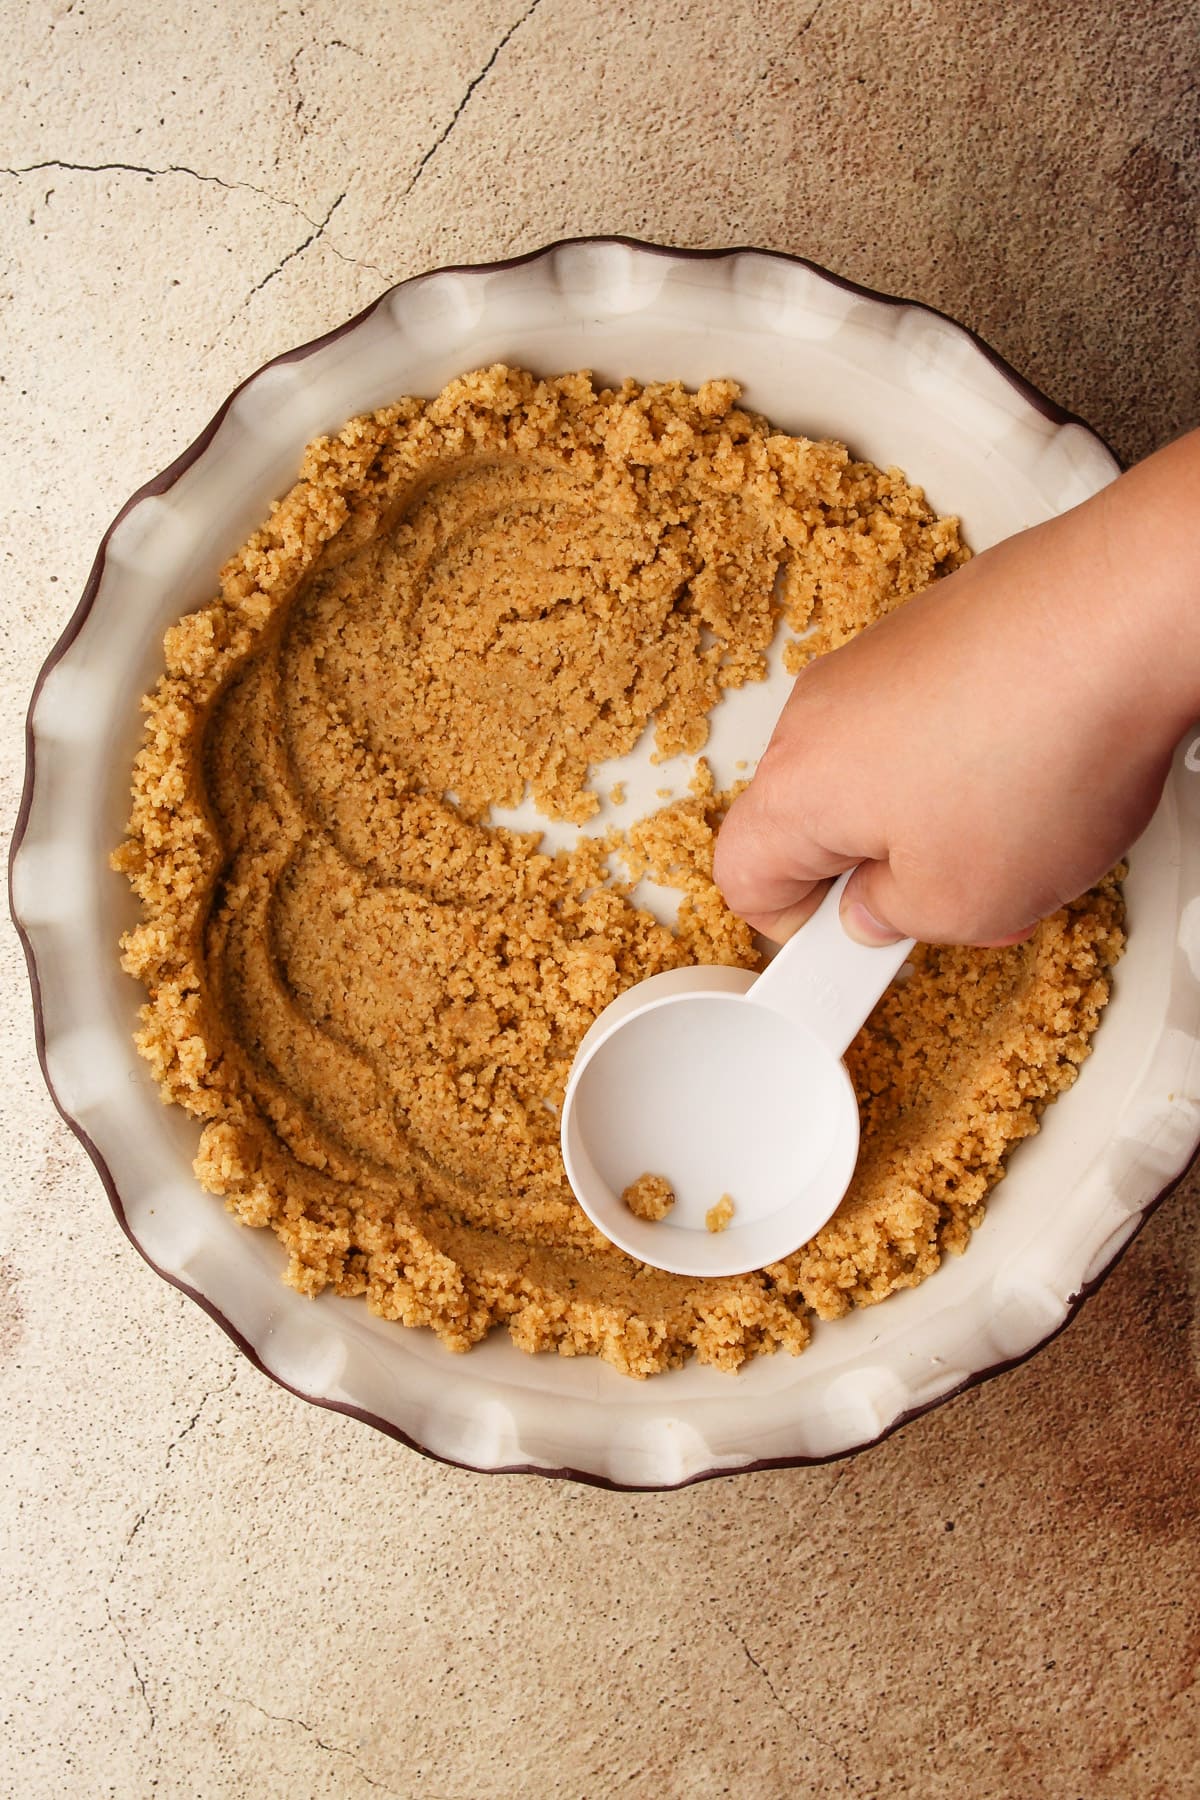 Pushing crumb crust ingredients into shape using a measuring cup in a pie dish.